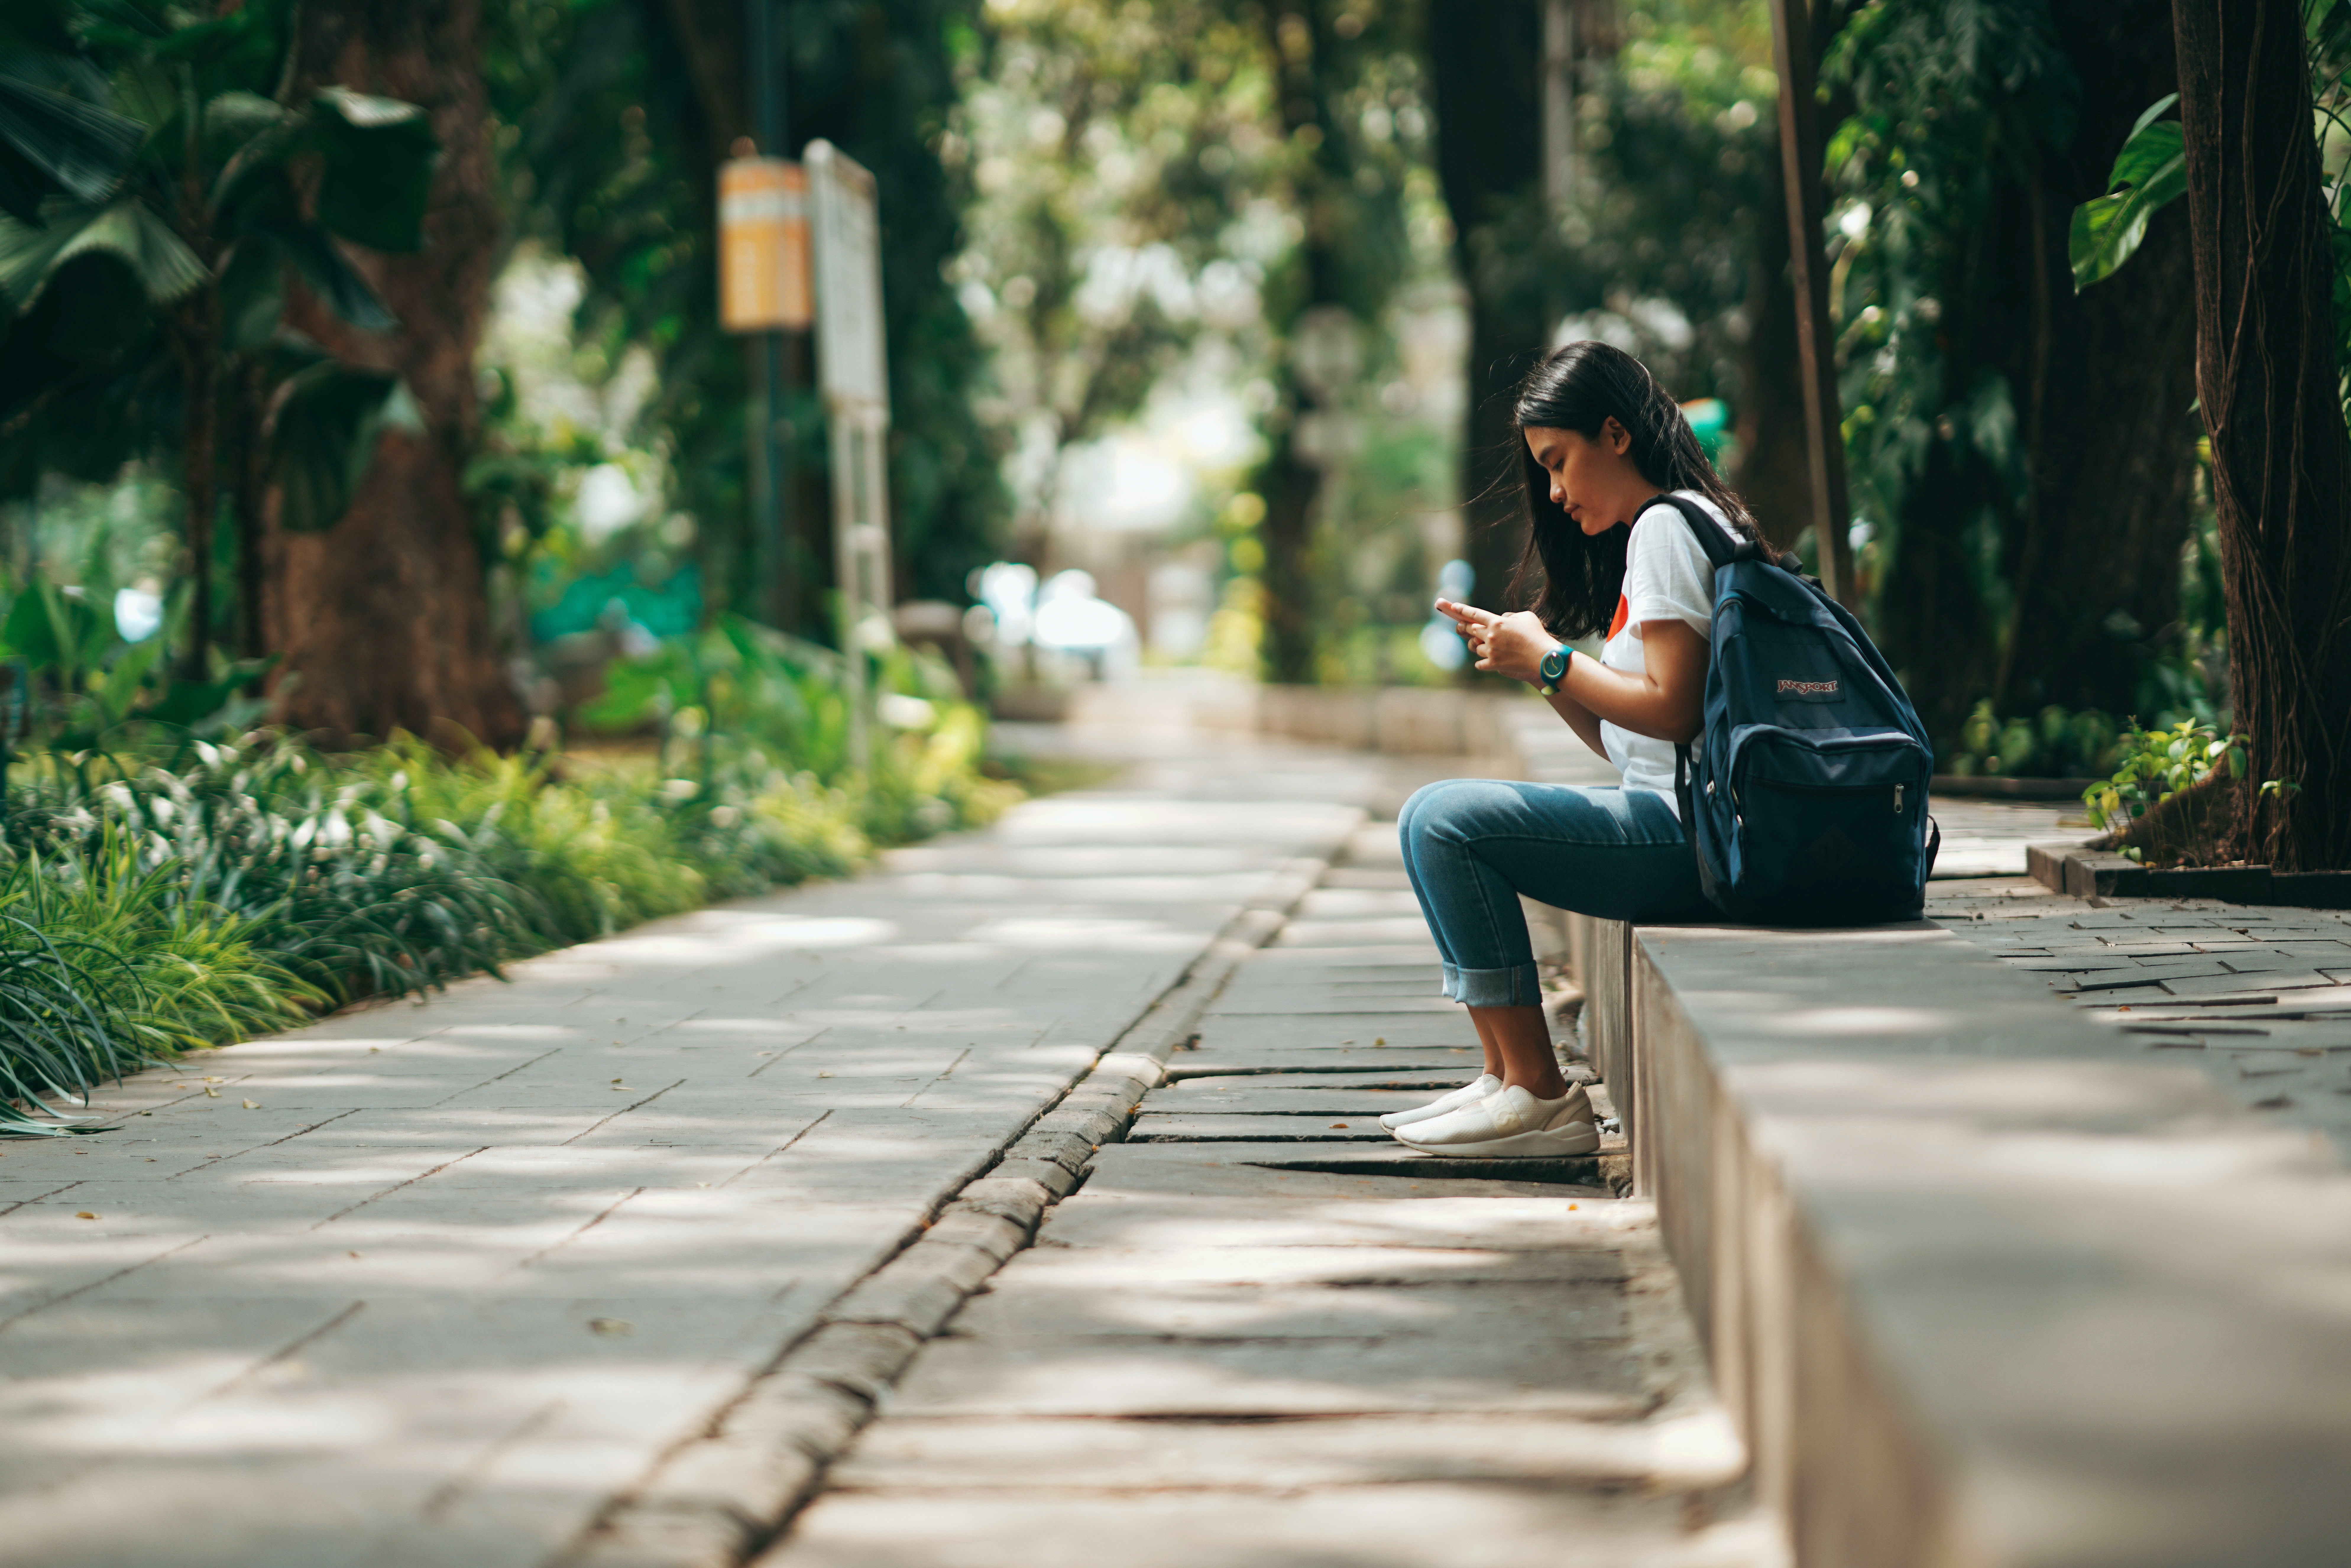 A girl texting while sitting on the pavement